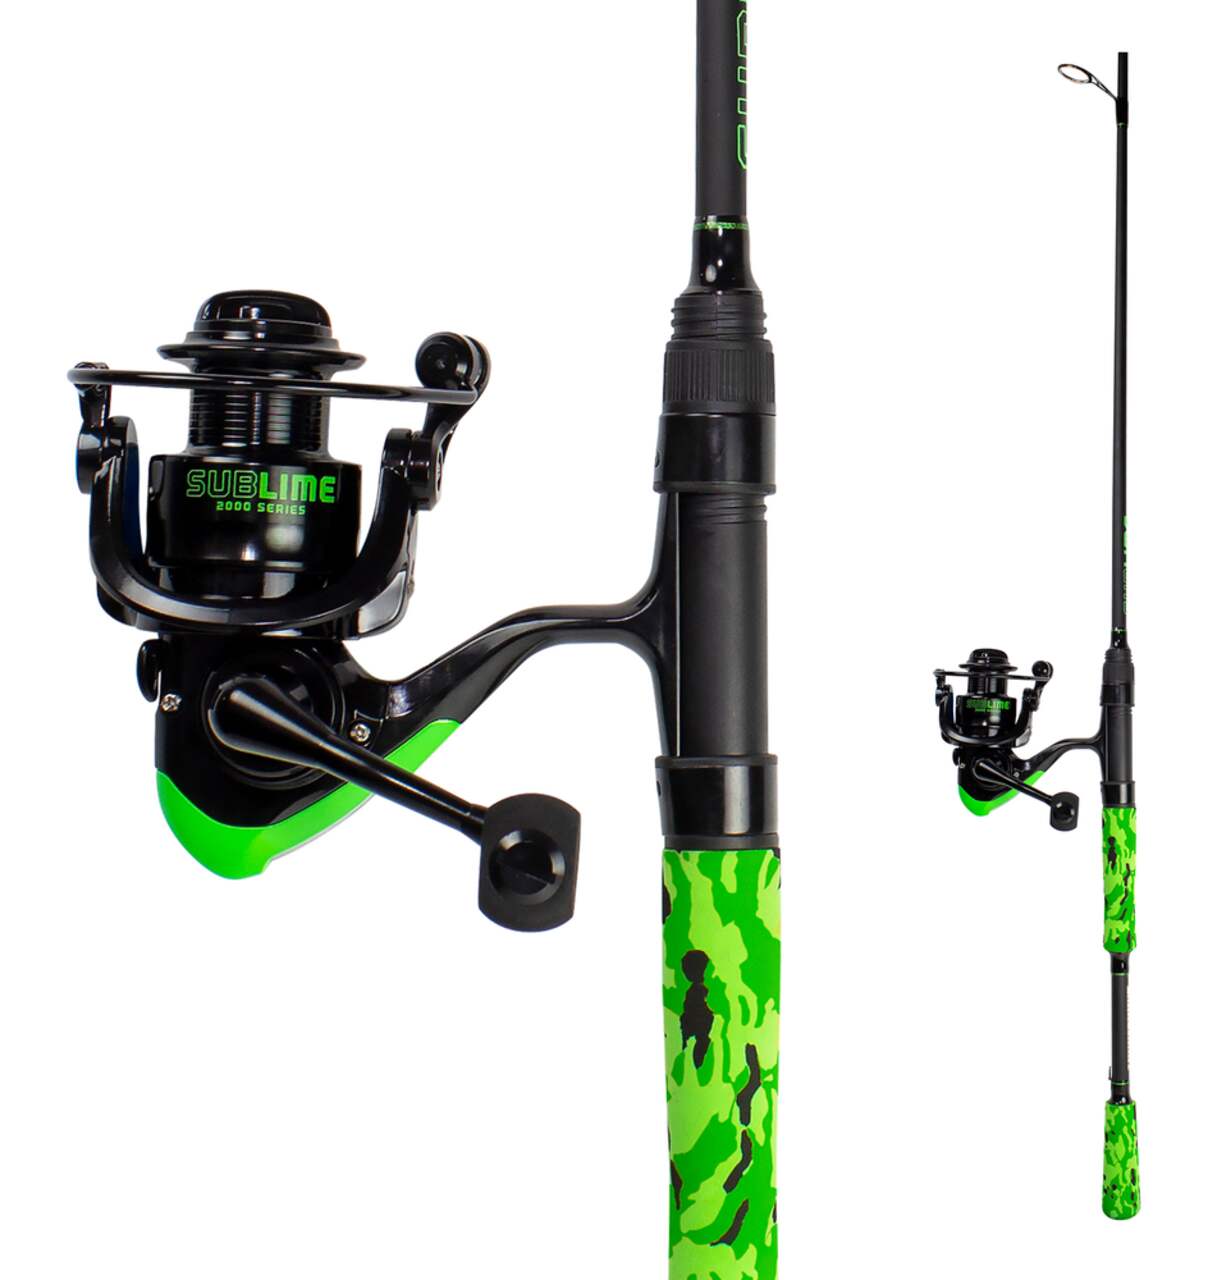 https://media-www.canadiantire.ca/product/playing/fishing/fishing-equipment/1784940/lunkerhunt-sublime-spinning-combo-6-8-medium-0076254d-dfd9-4d5b-9f15-64172d8806c0.png?imdensity=1&imwidth=640&impolicy=mZoom